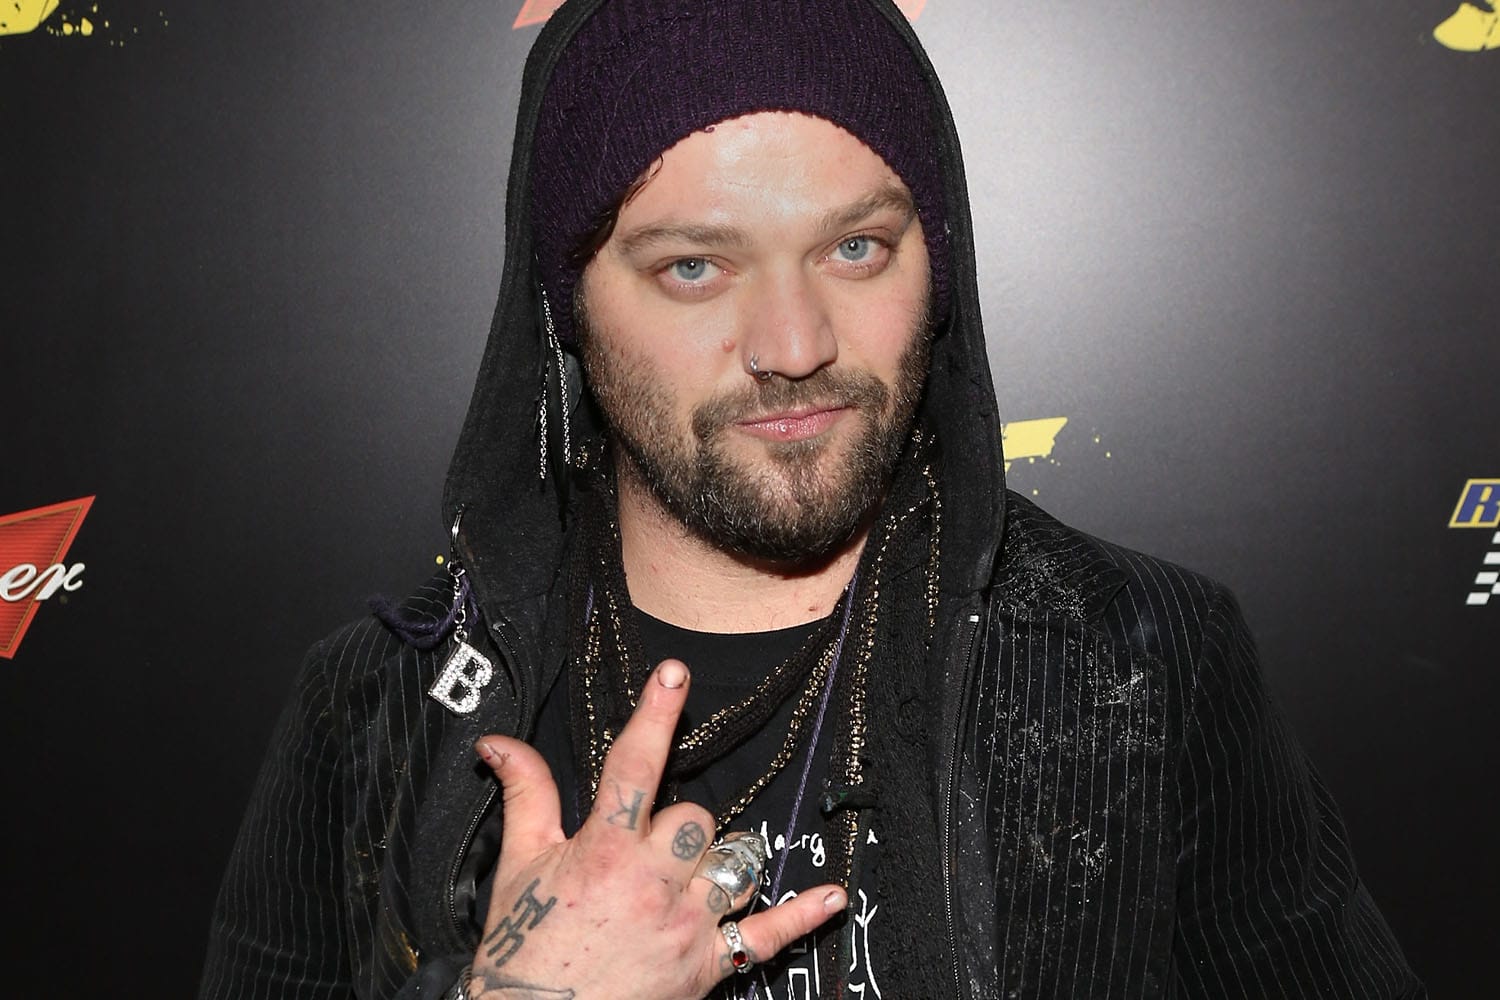 Bam Margera Net Worth - The Rise To Fame, Challenges, And Impact On Pop Culture